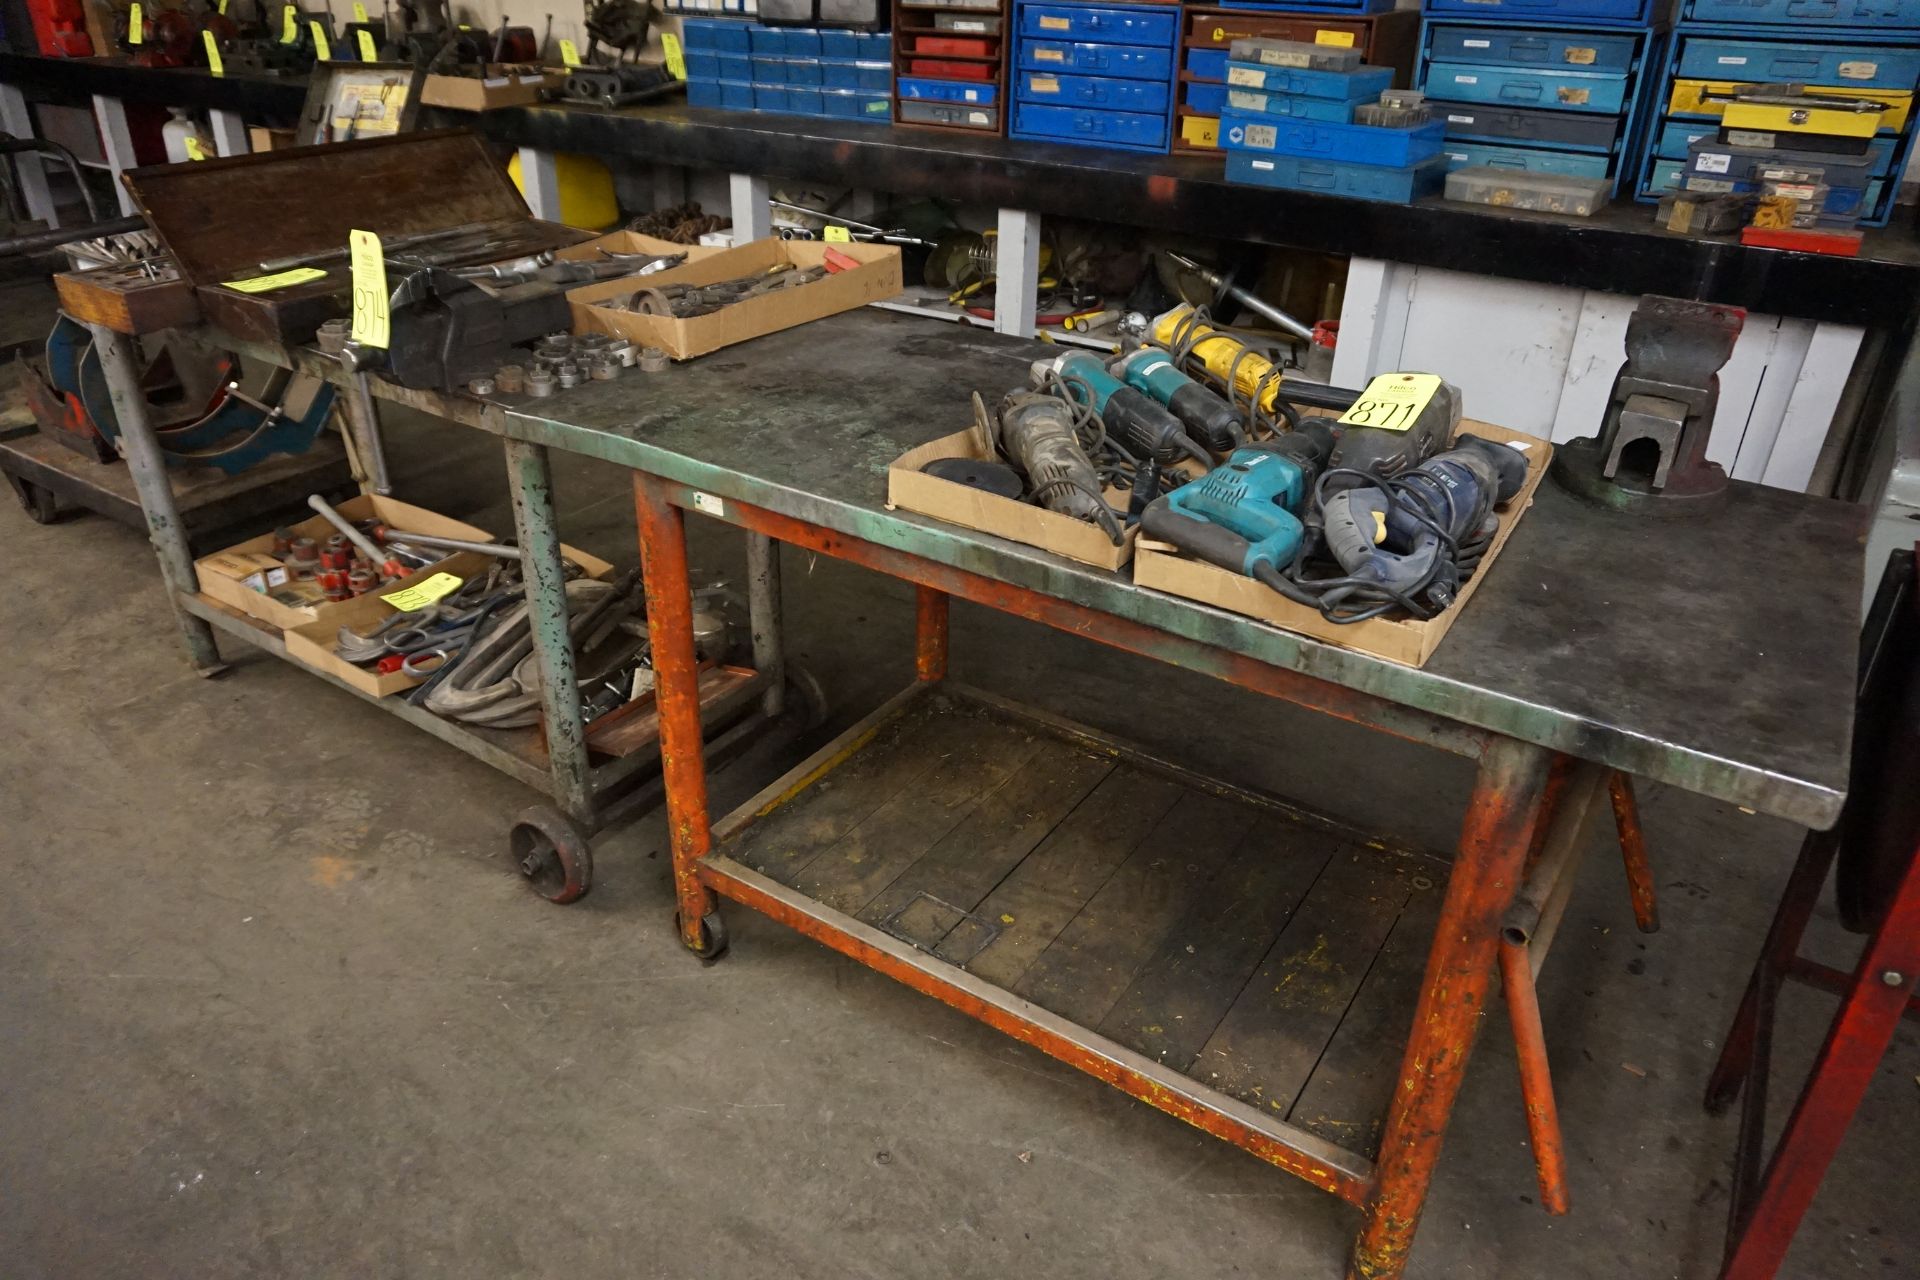 54" x 24" Metal Shop Tables with Vise